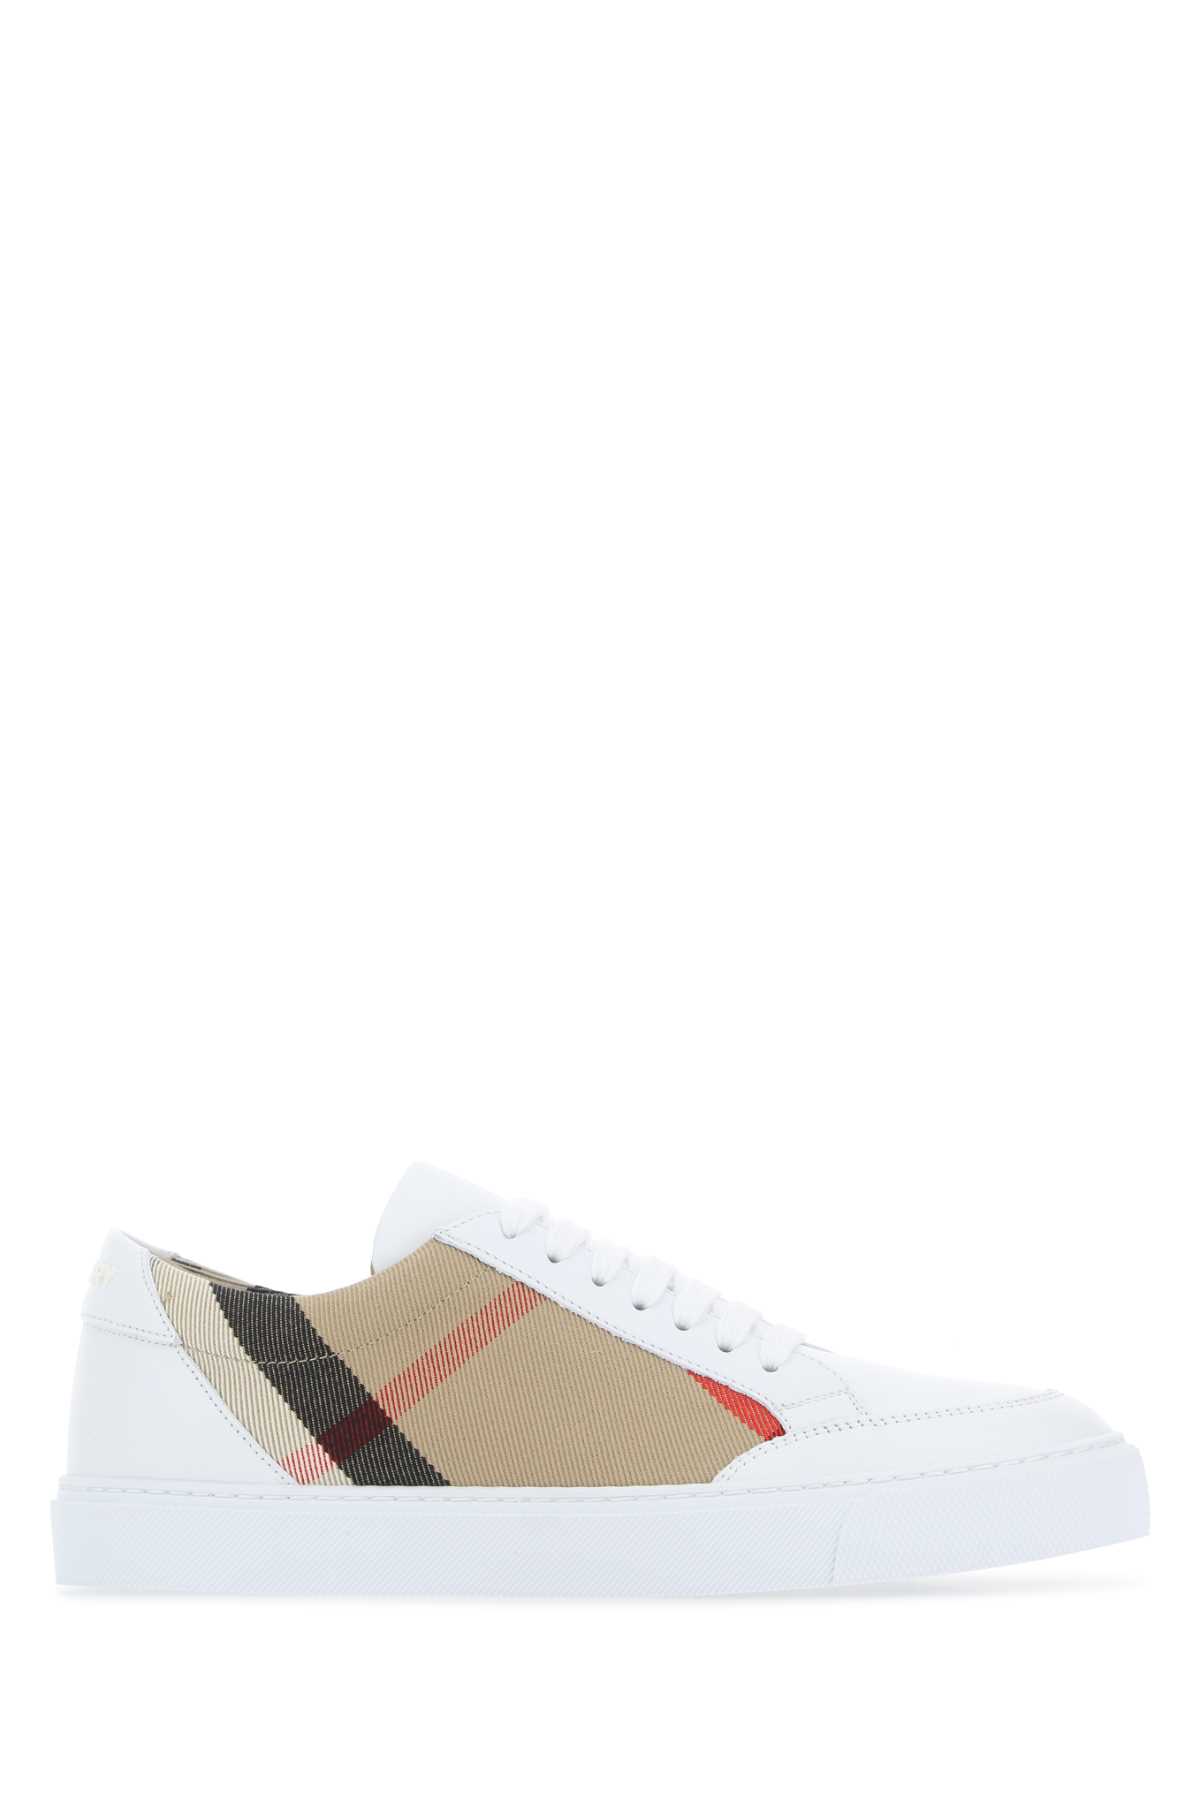 Burberry Multicolor Leather And Fabric Sneakers